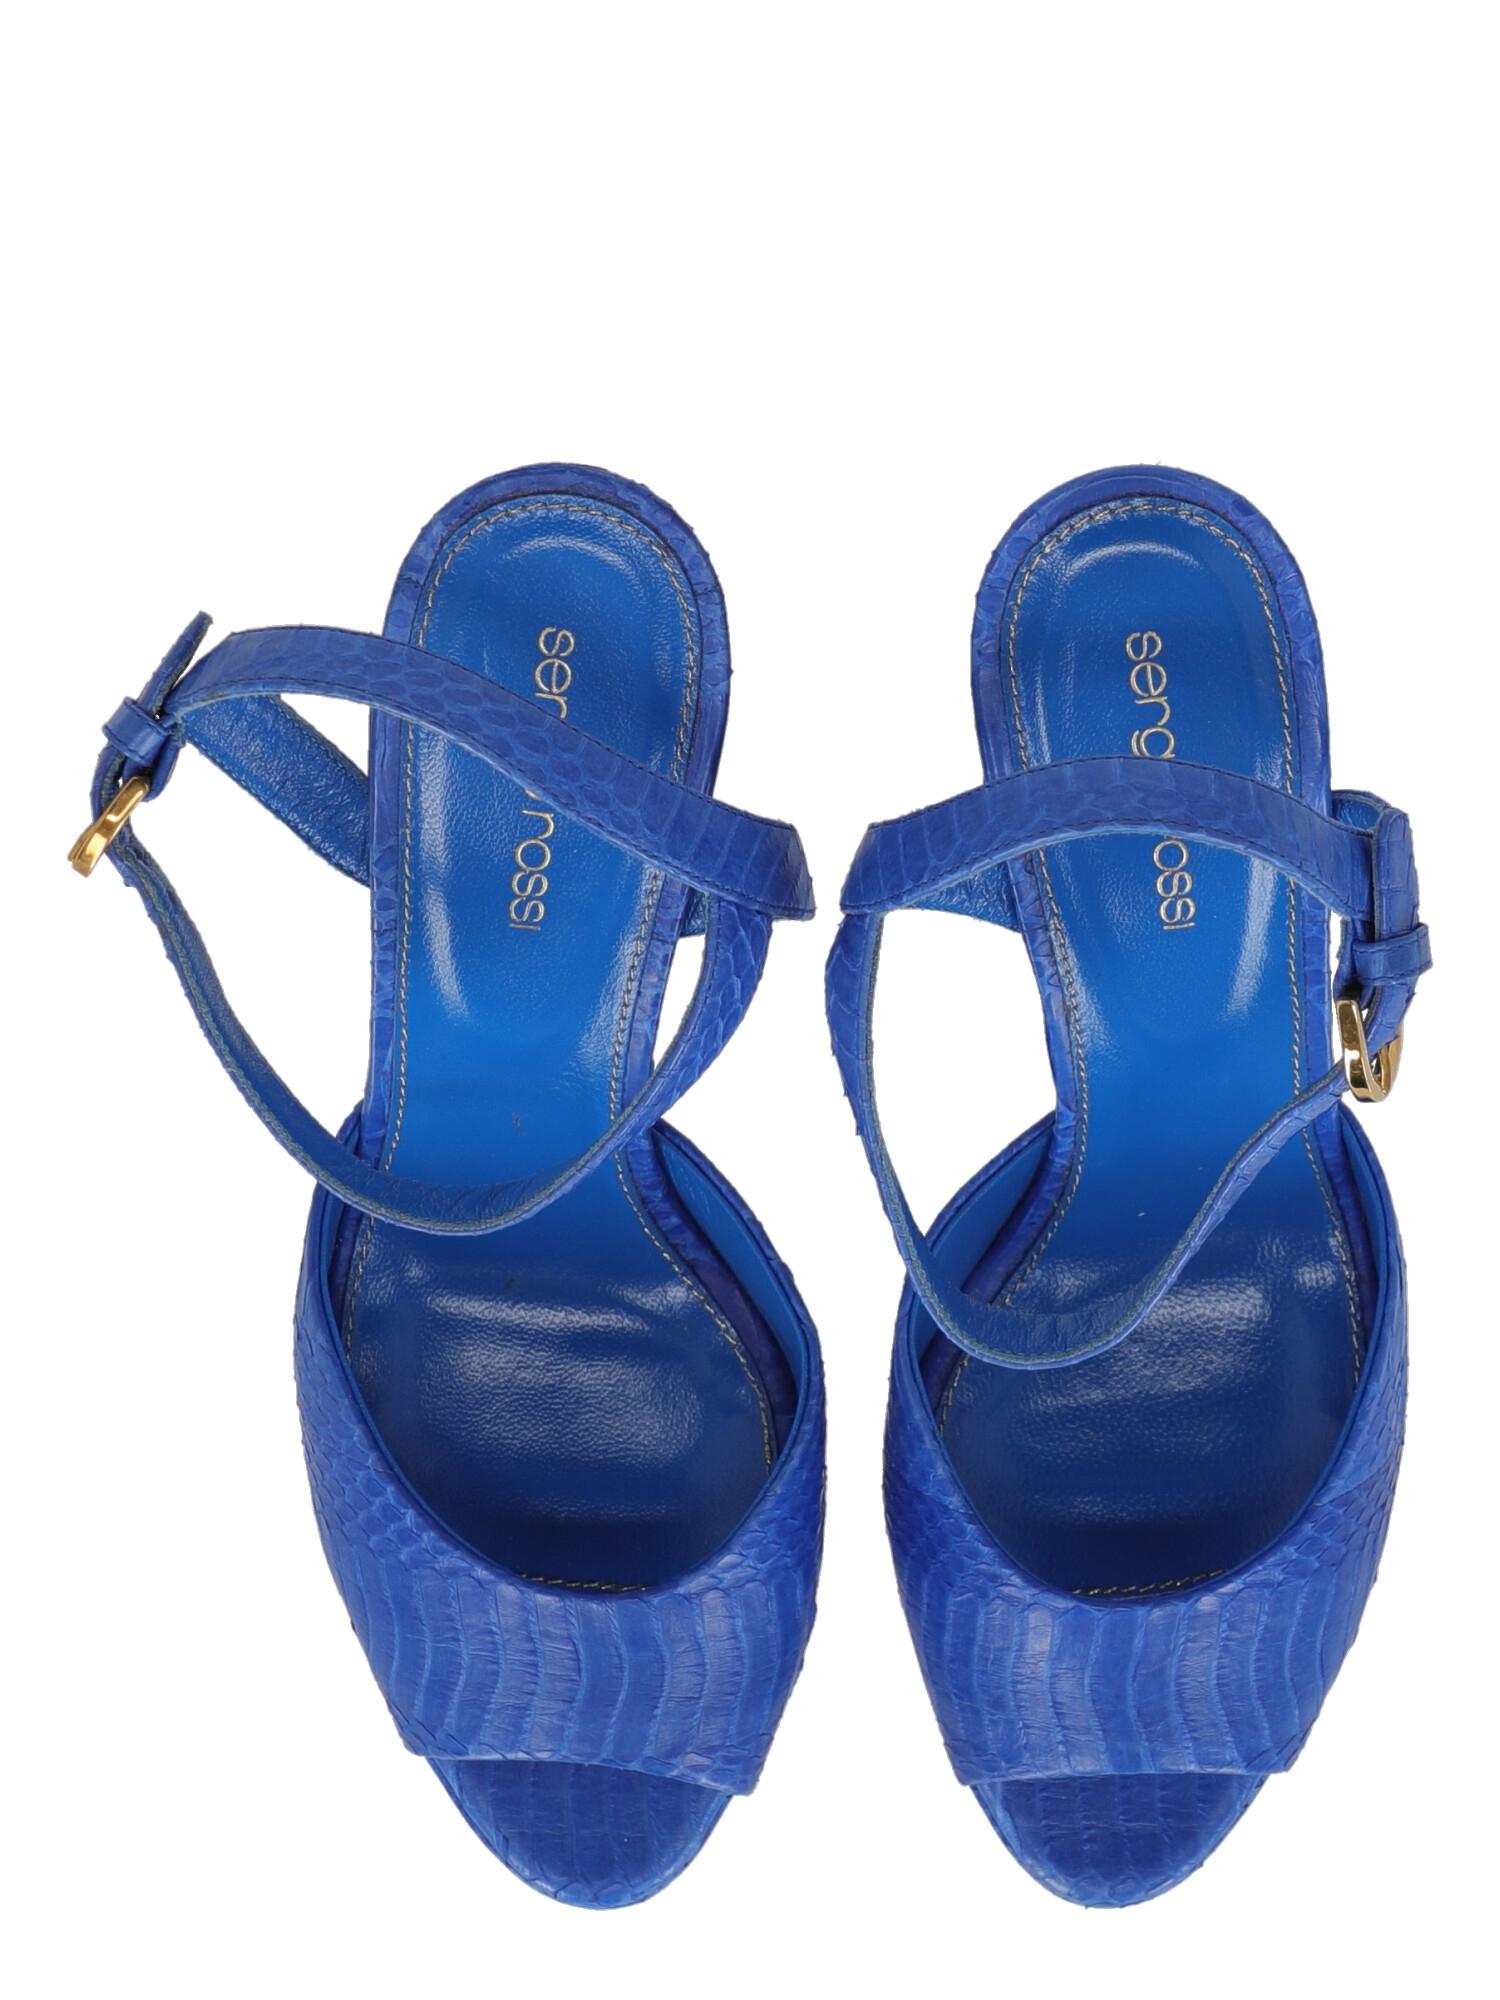 Women's Sergio Rossi  Women   Sandals  Navy Leather EU 38.5 For Sale